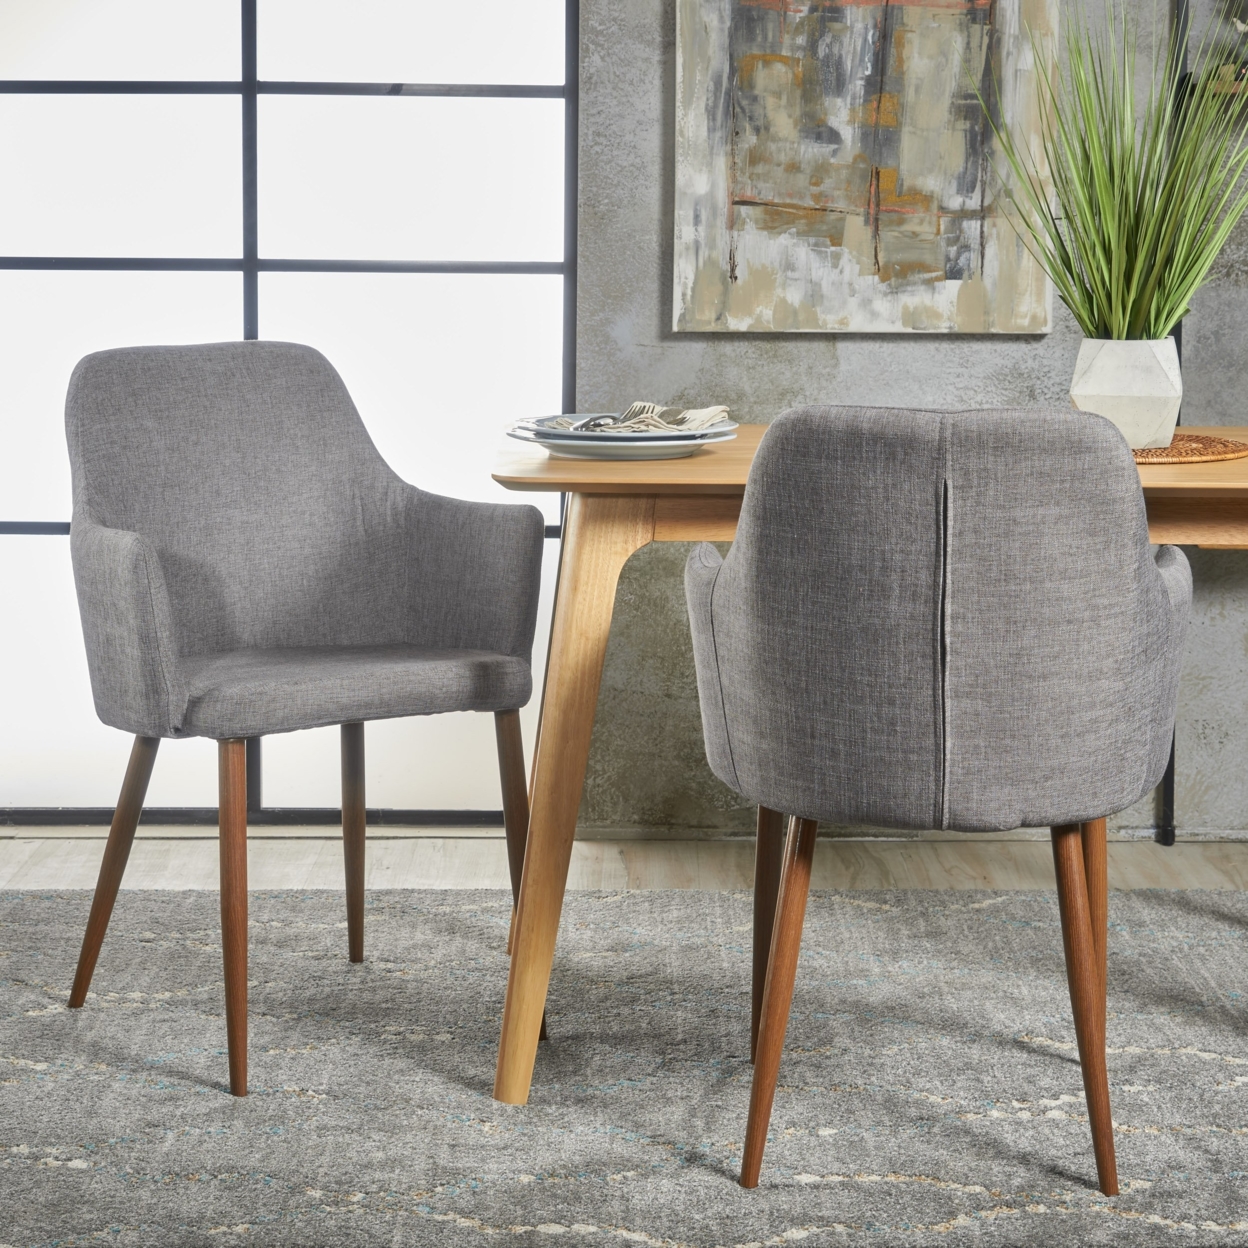 Serra Mid Century Fabric Dining Chair With Wood Finished Metal Legs (Set Of 2) - Green/Dark Brown